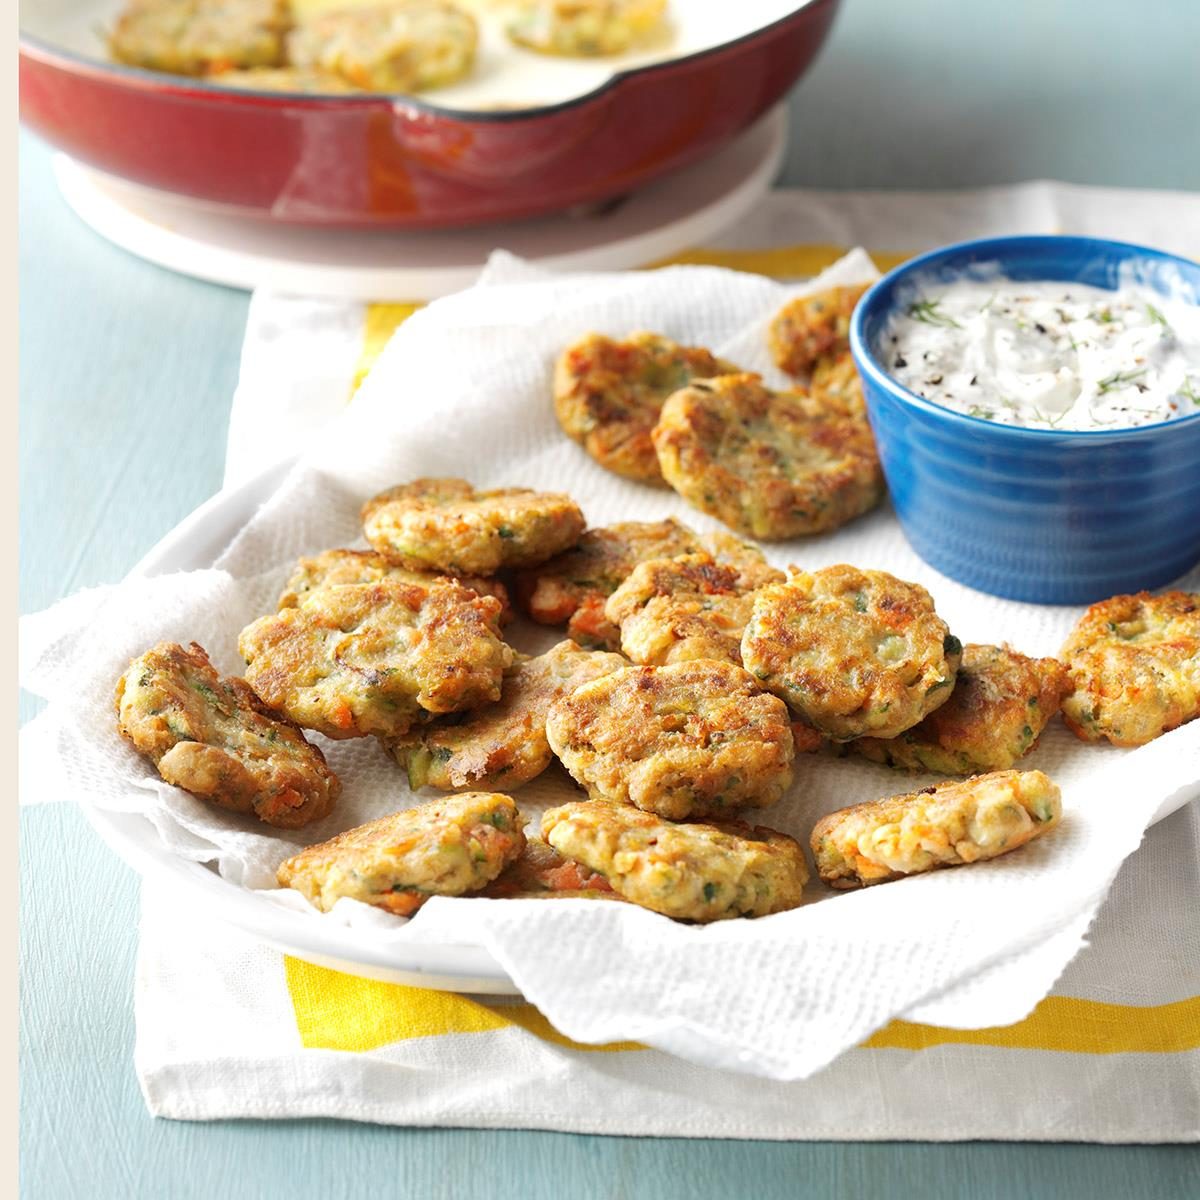 Zucchini Patties with Dill Dip